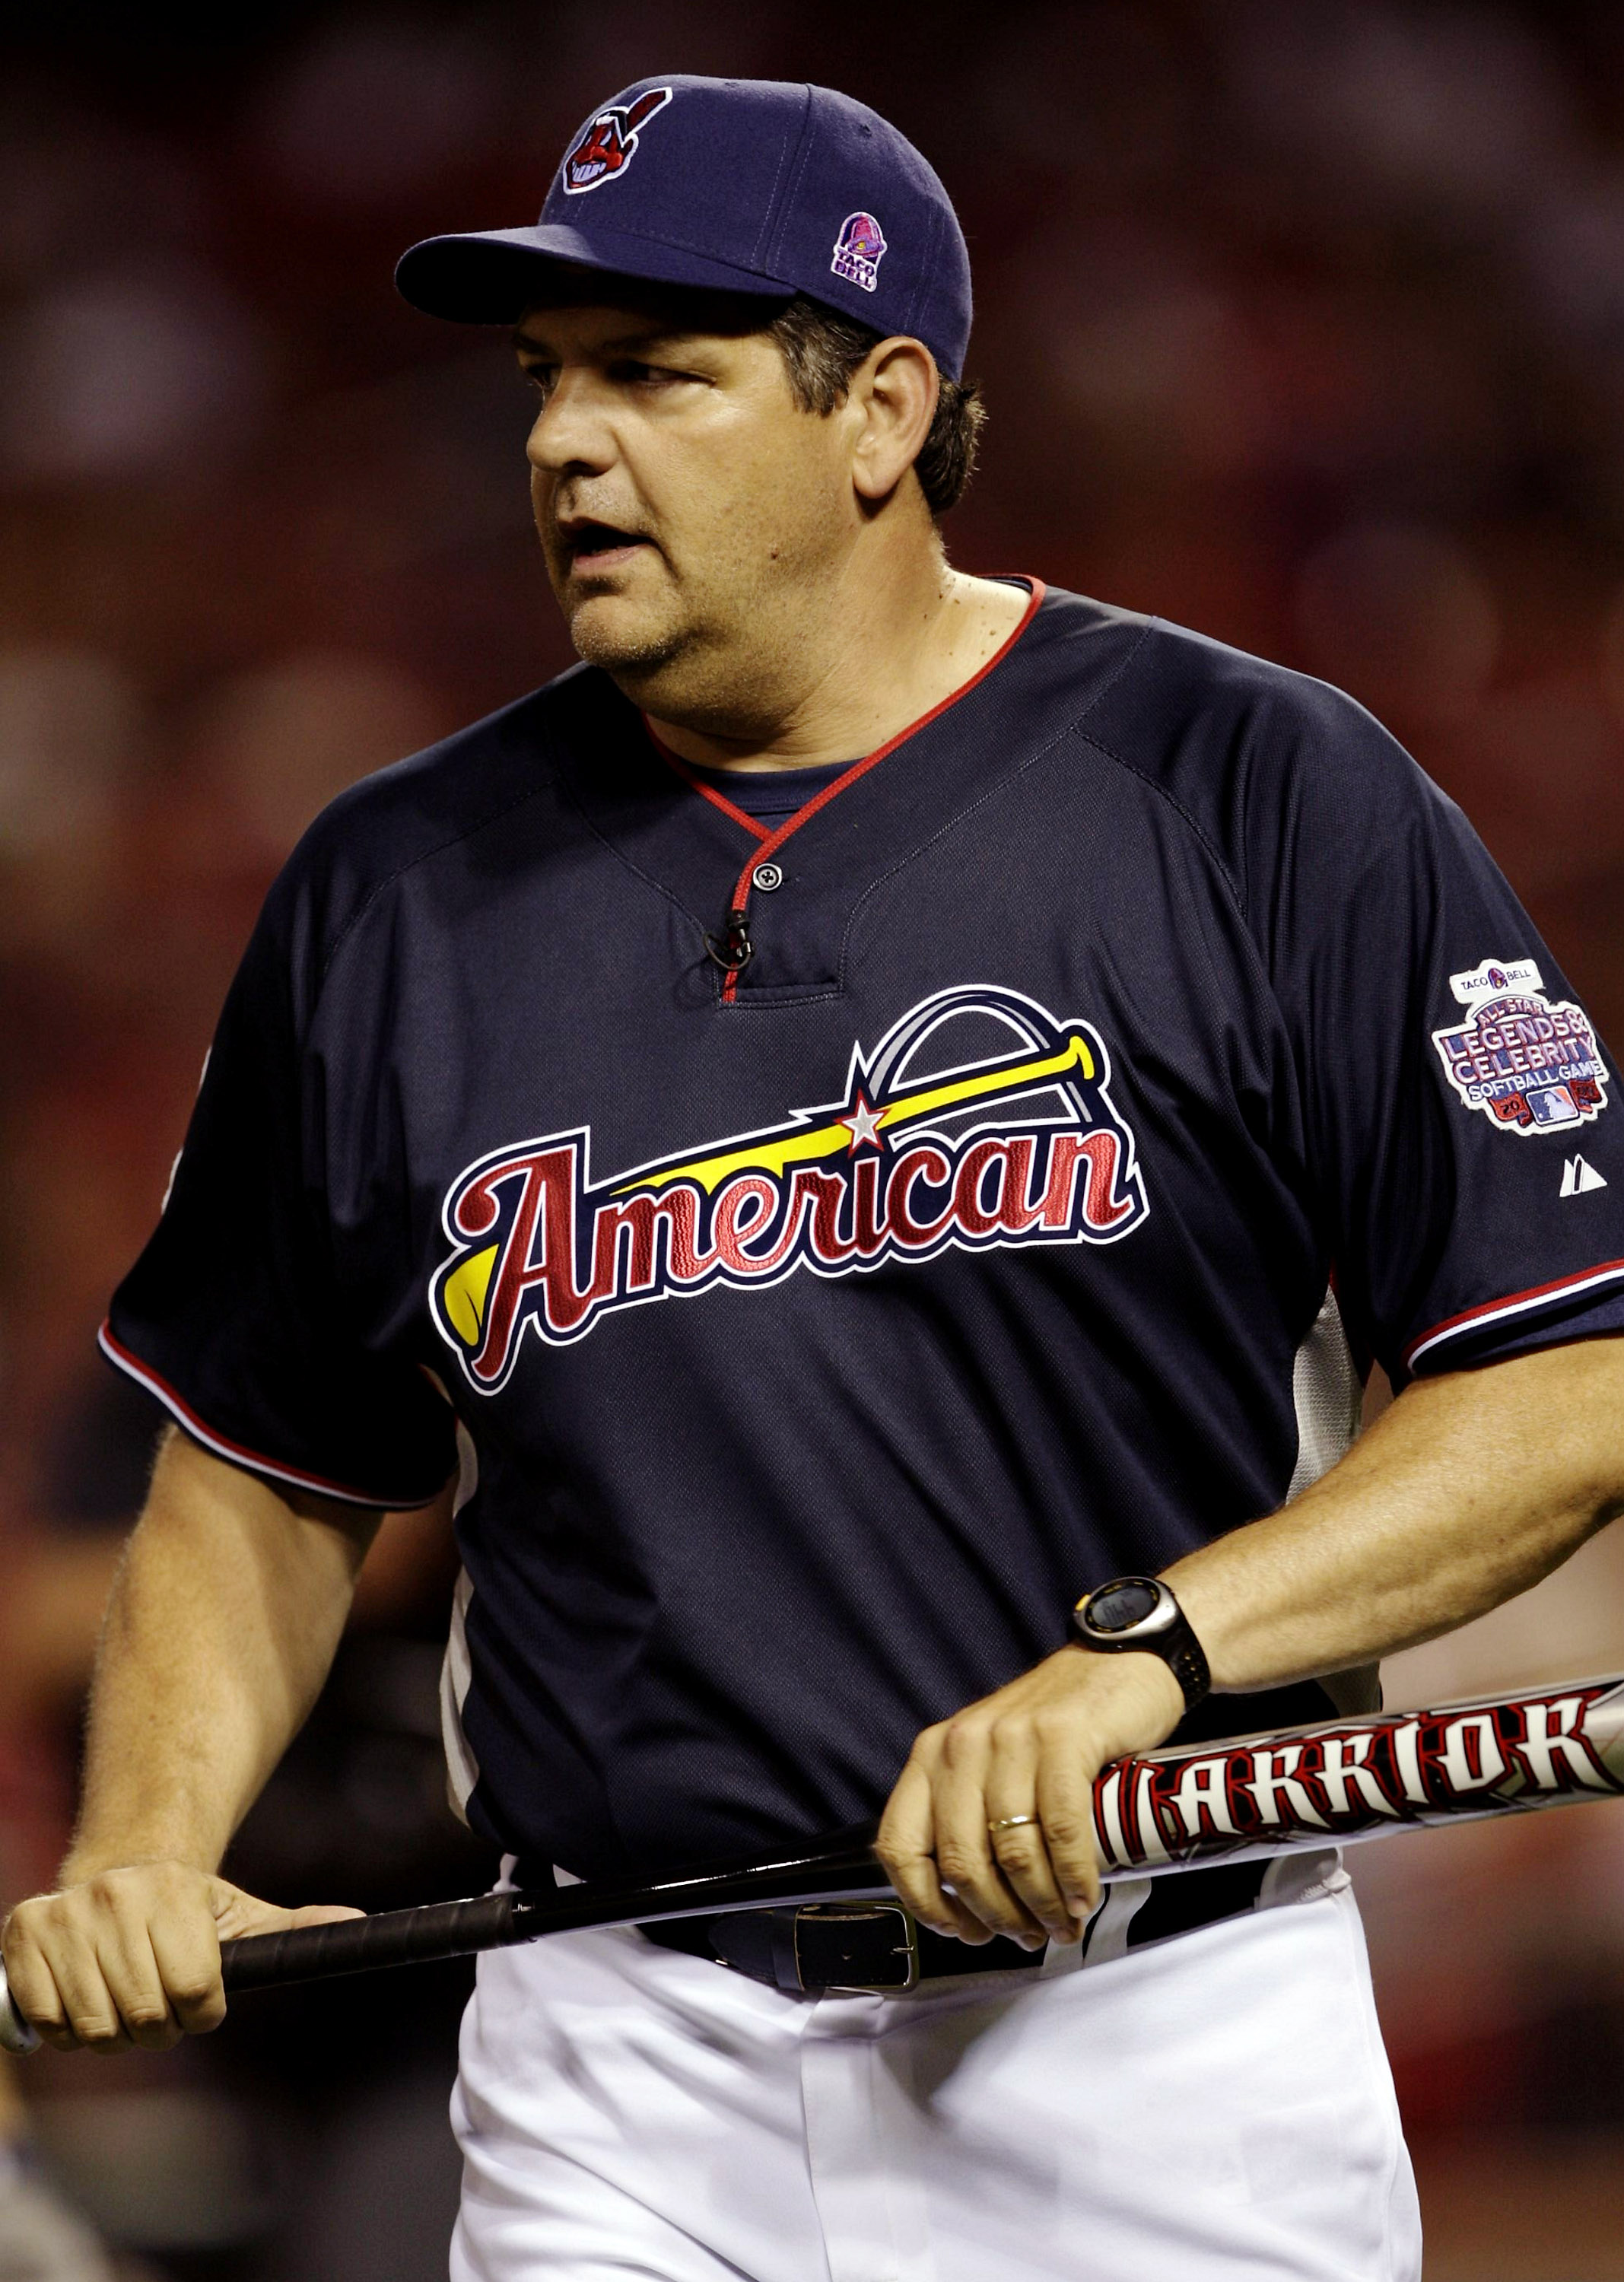 ST. LOUIS - JULY 12: TV personality Mike Golic bats during the Taco Bell All-Star Legends & Celebrity Softball Game at Busch Stadium on July 12, 2009 in St. Louis, Missouri. (Photo by Jamie Squire/Getty Images)